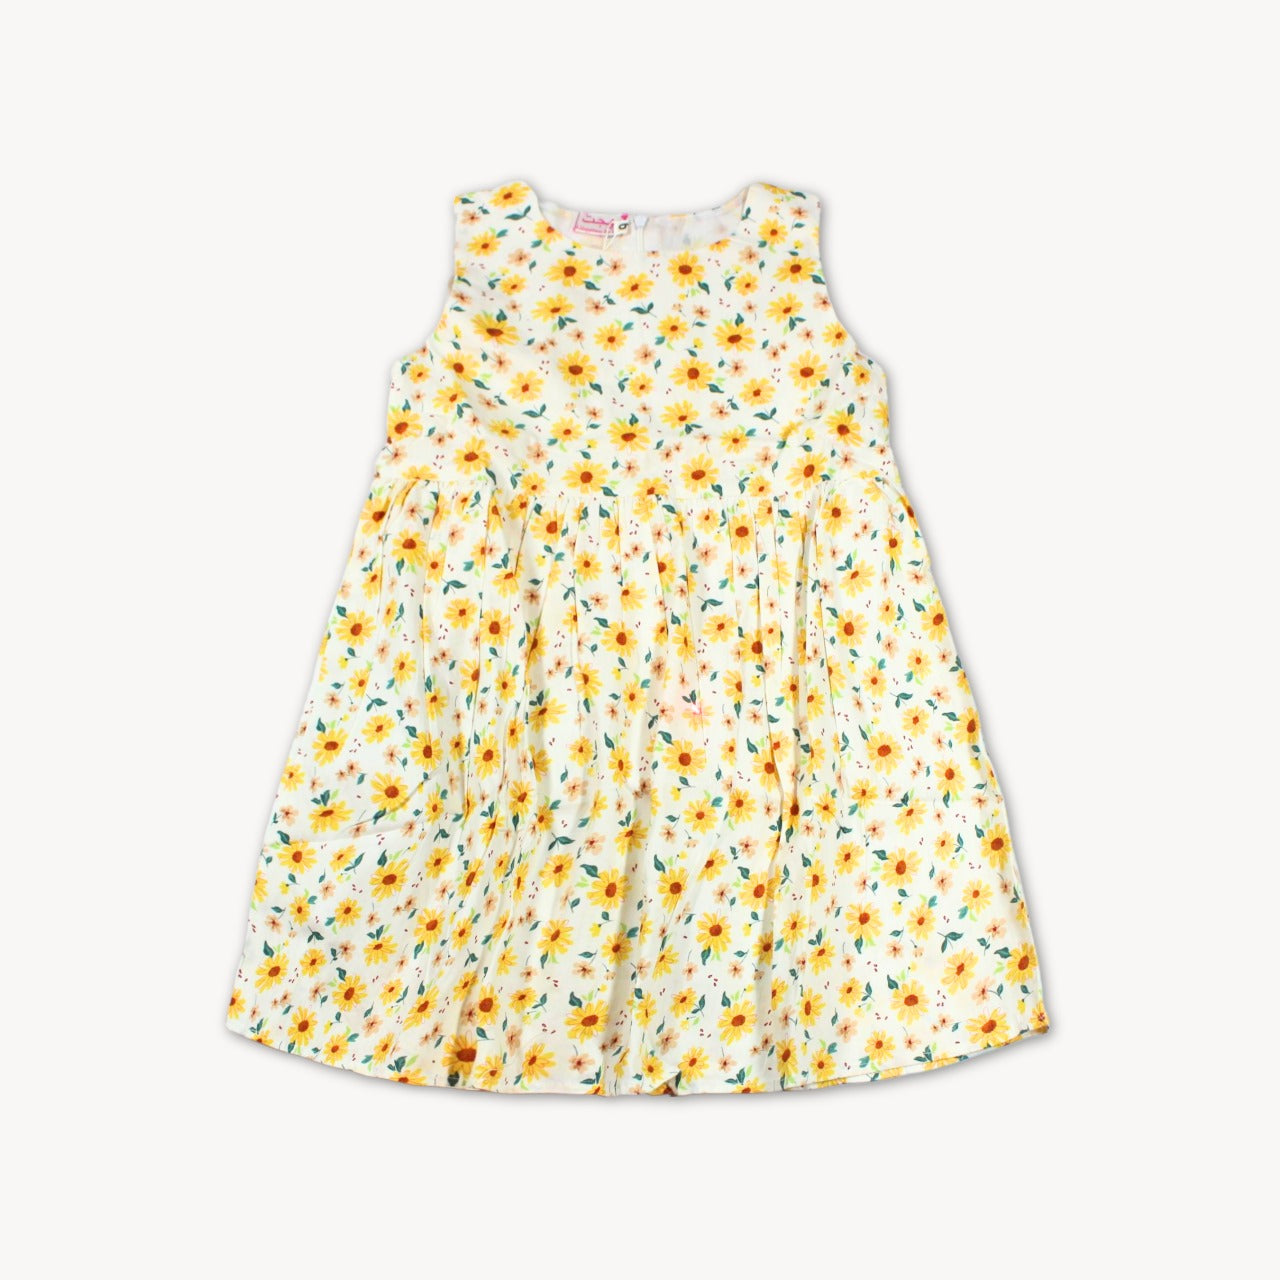 White & Yellow Sunflower Summer Printed Cotton Frock